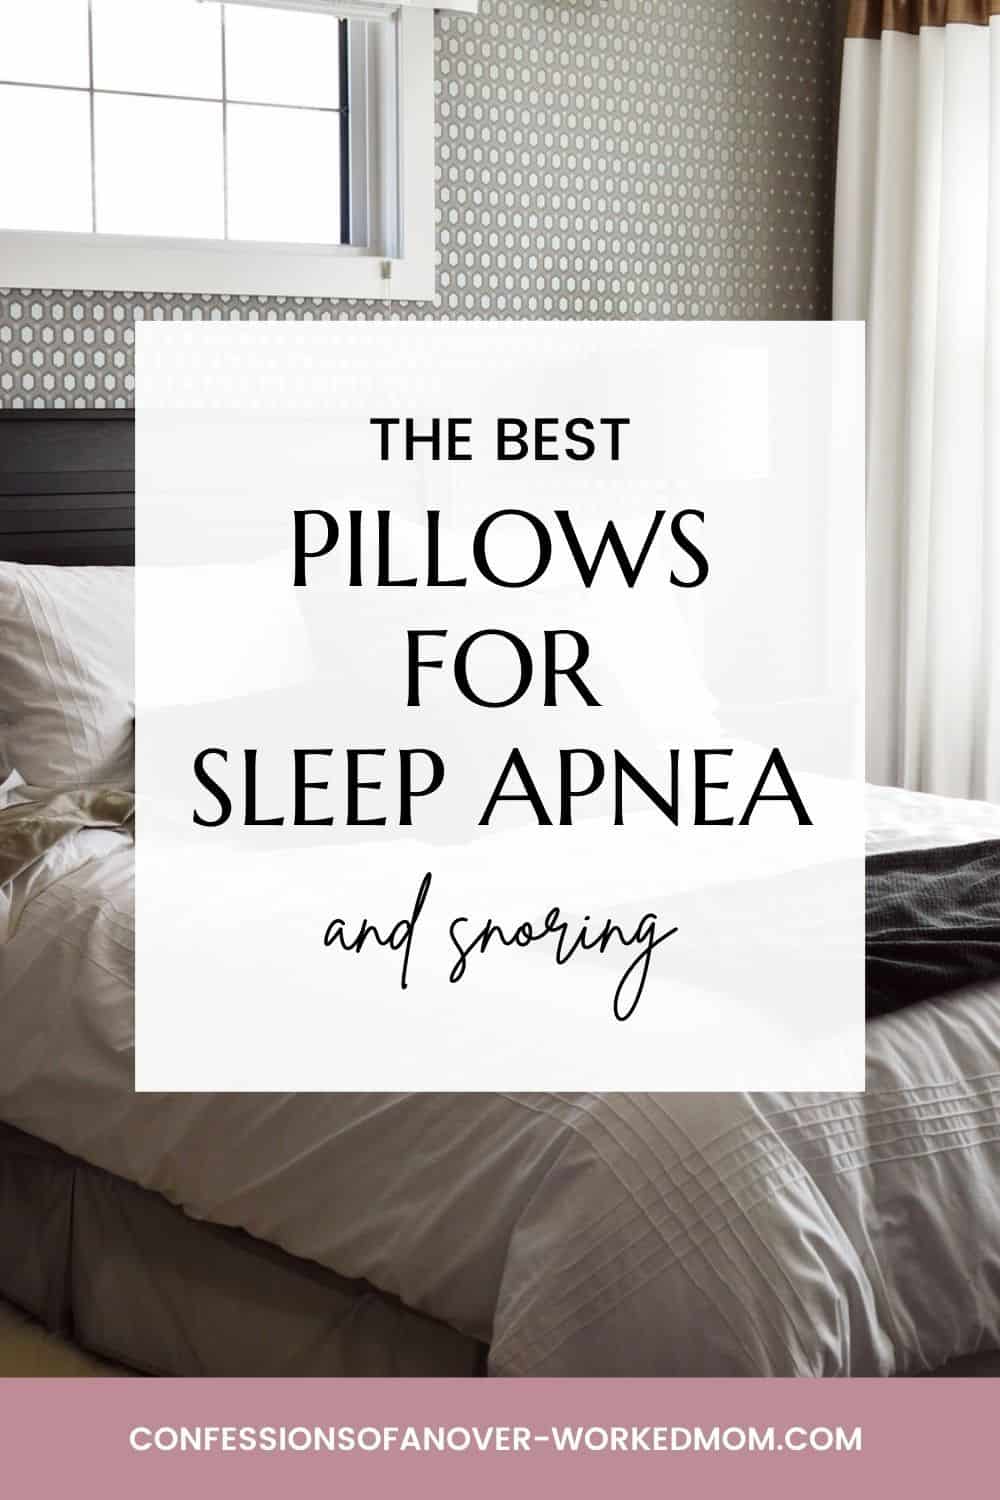 Sleep apnea is a common condition that affects millions of people. If you are one of them, then you know how hard it can be to get a good night's sleep. Choosing the best pillow for sleep apnea can go a long way toward helping you sleep soundly.